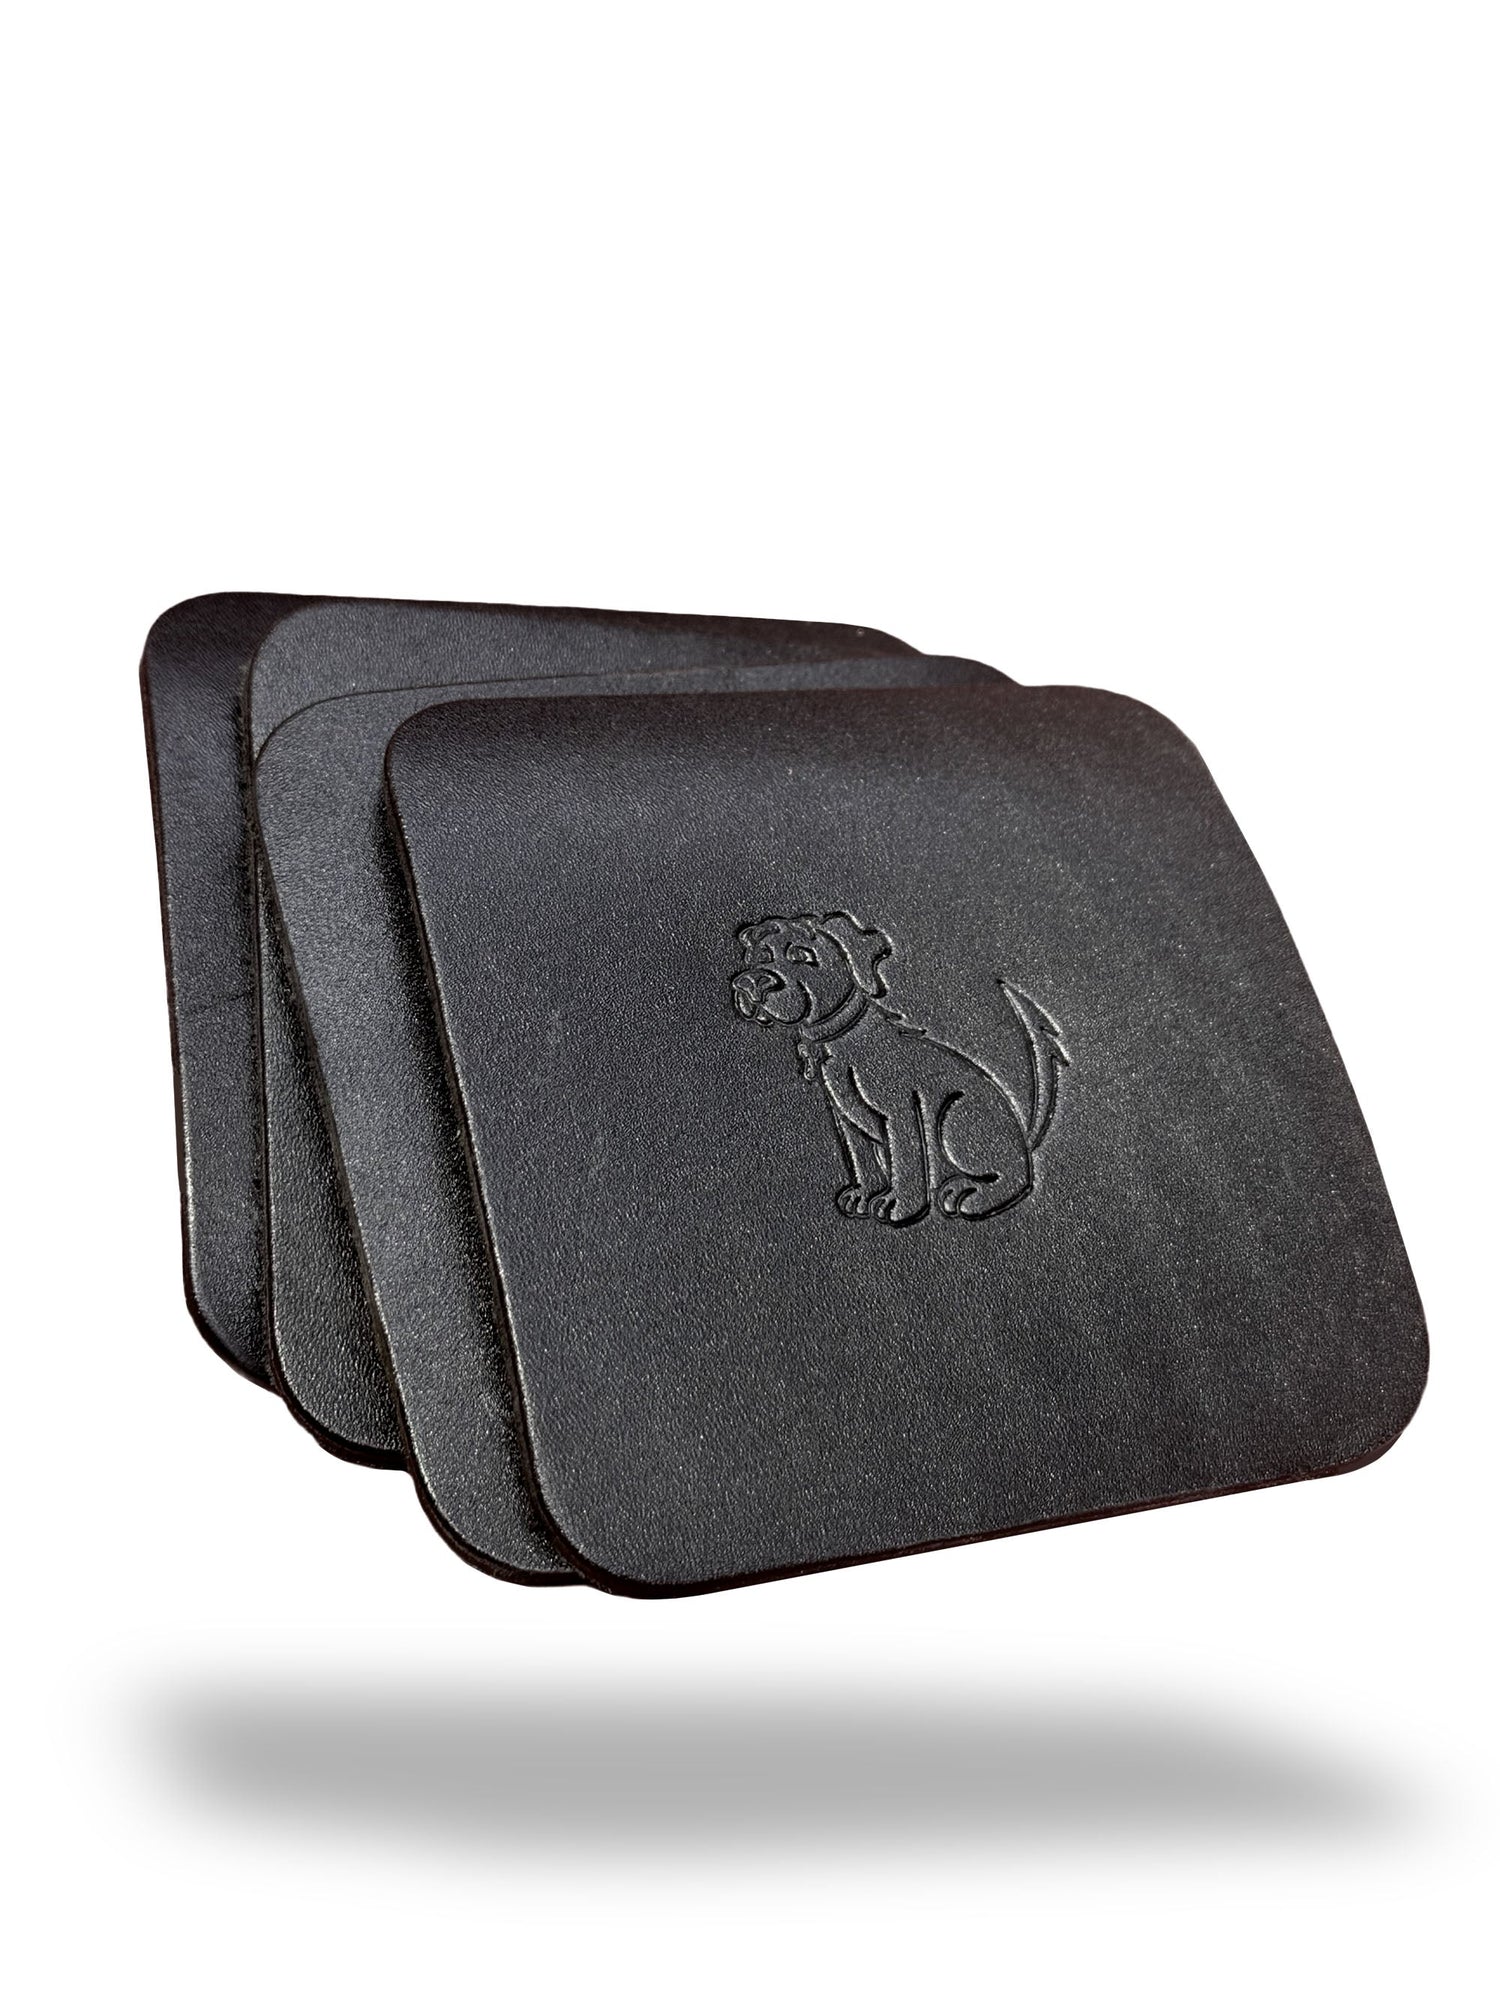 Square Leather Coasters with Dog Design - Set of 4